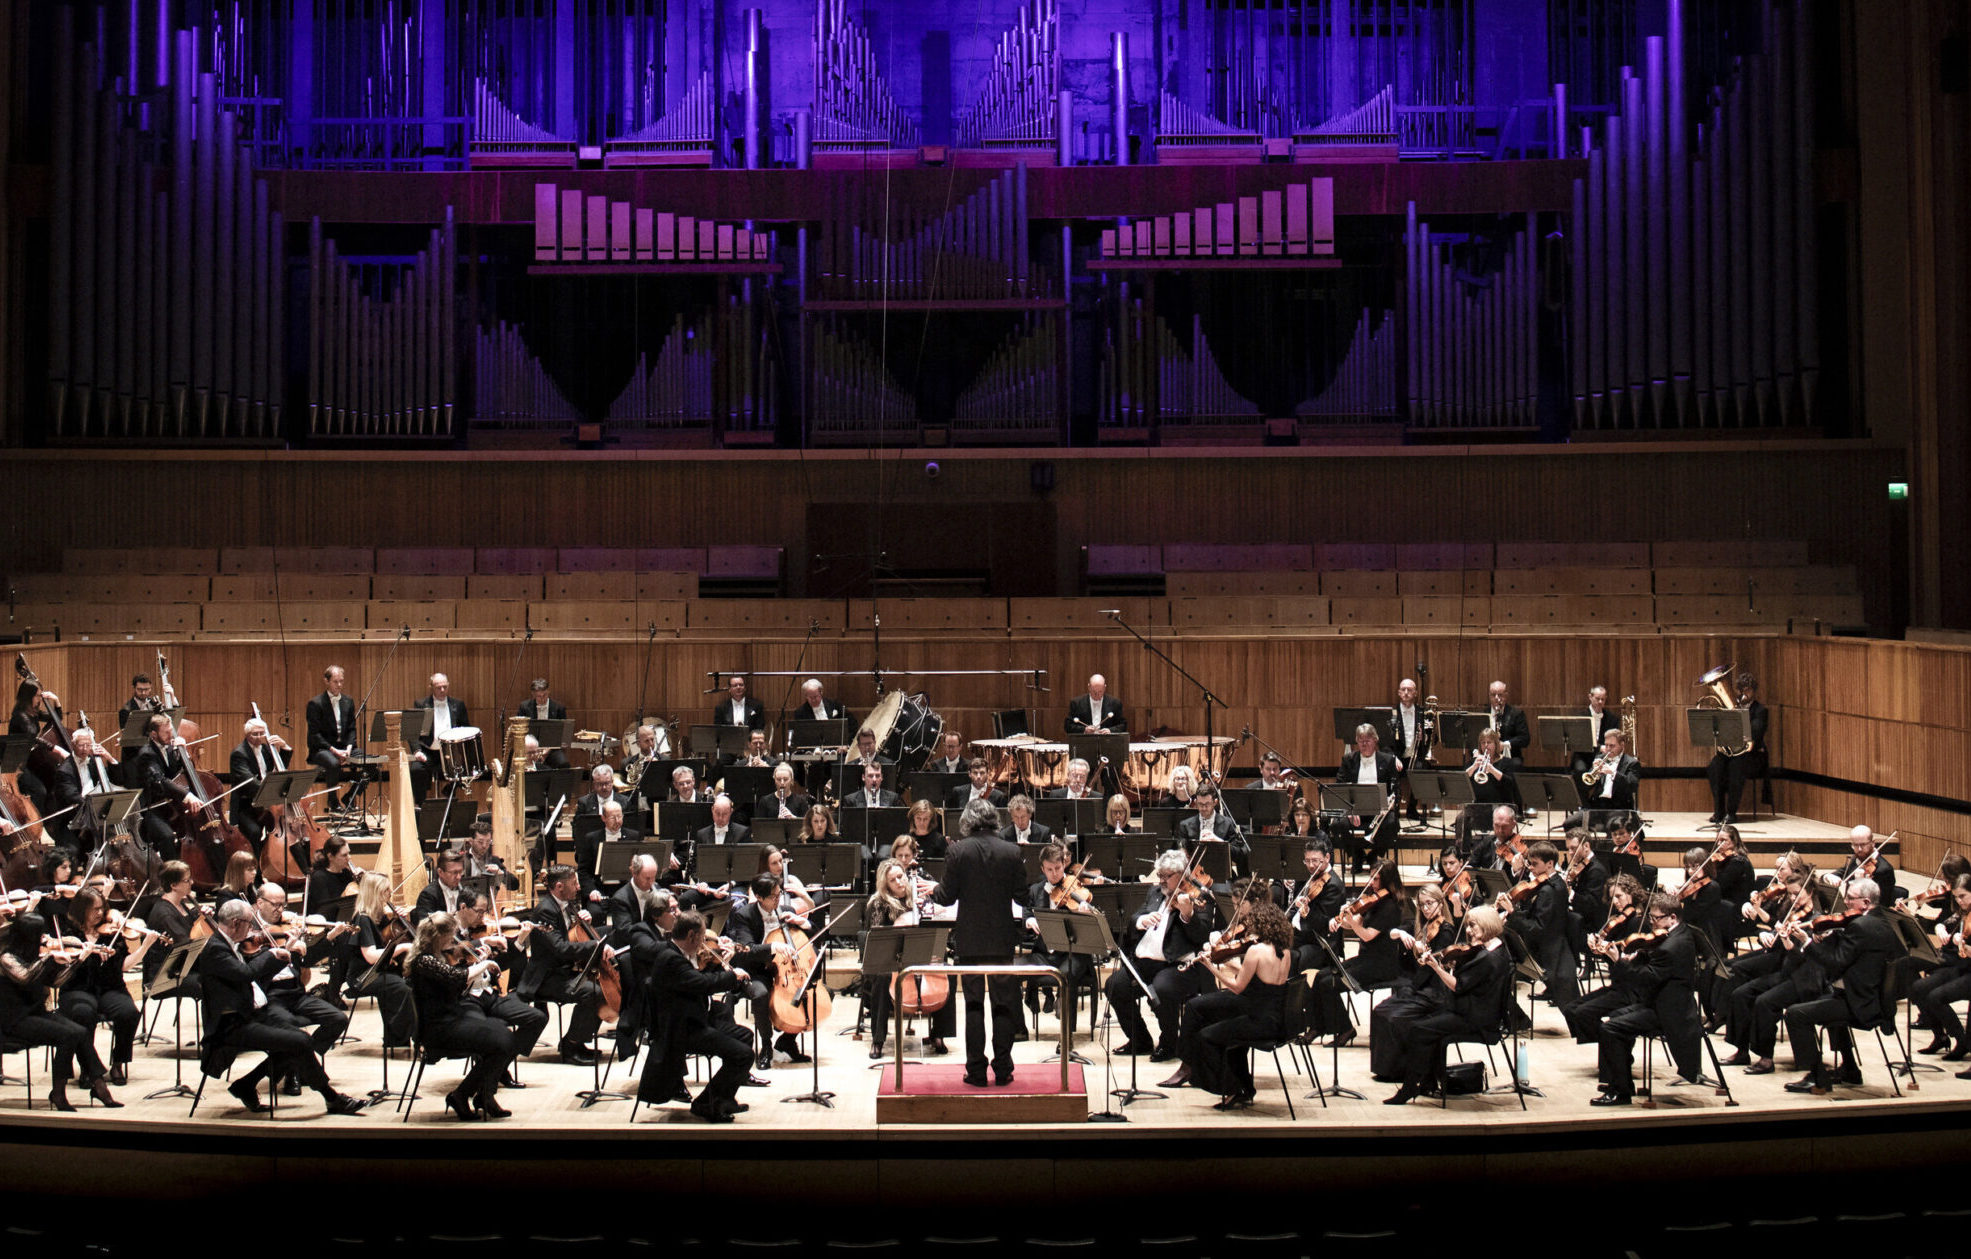 Discographic debut with the London Philharmonic Orchestra